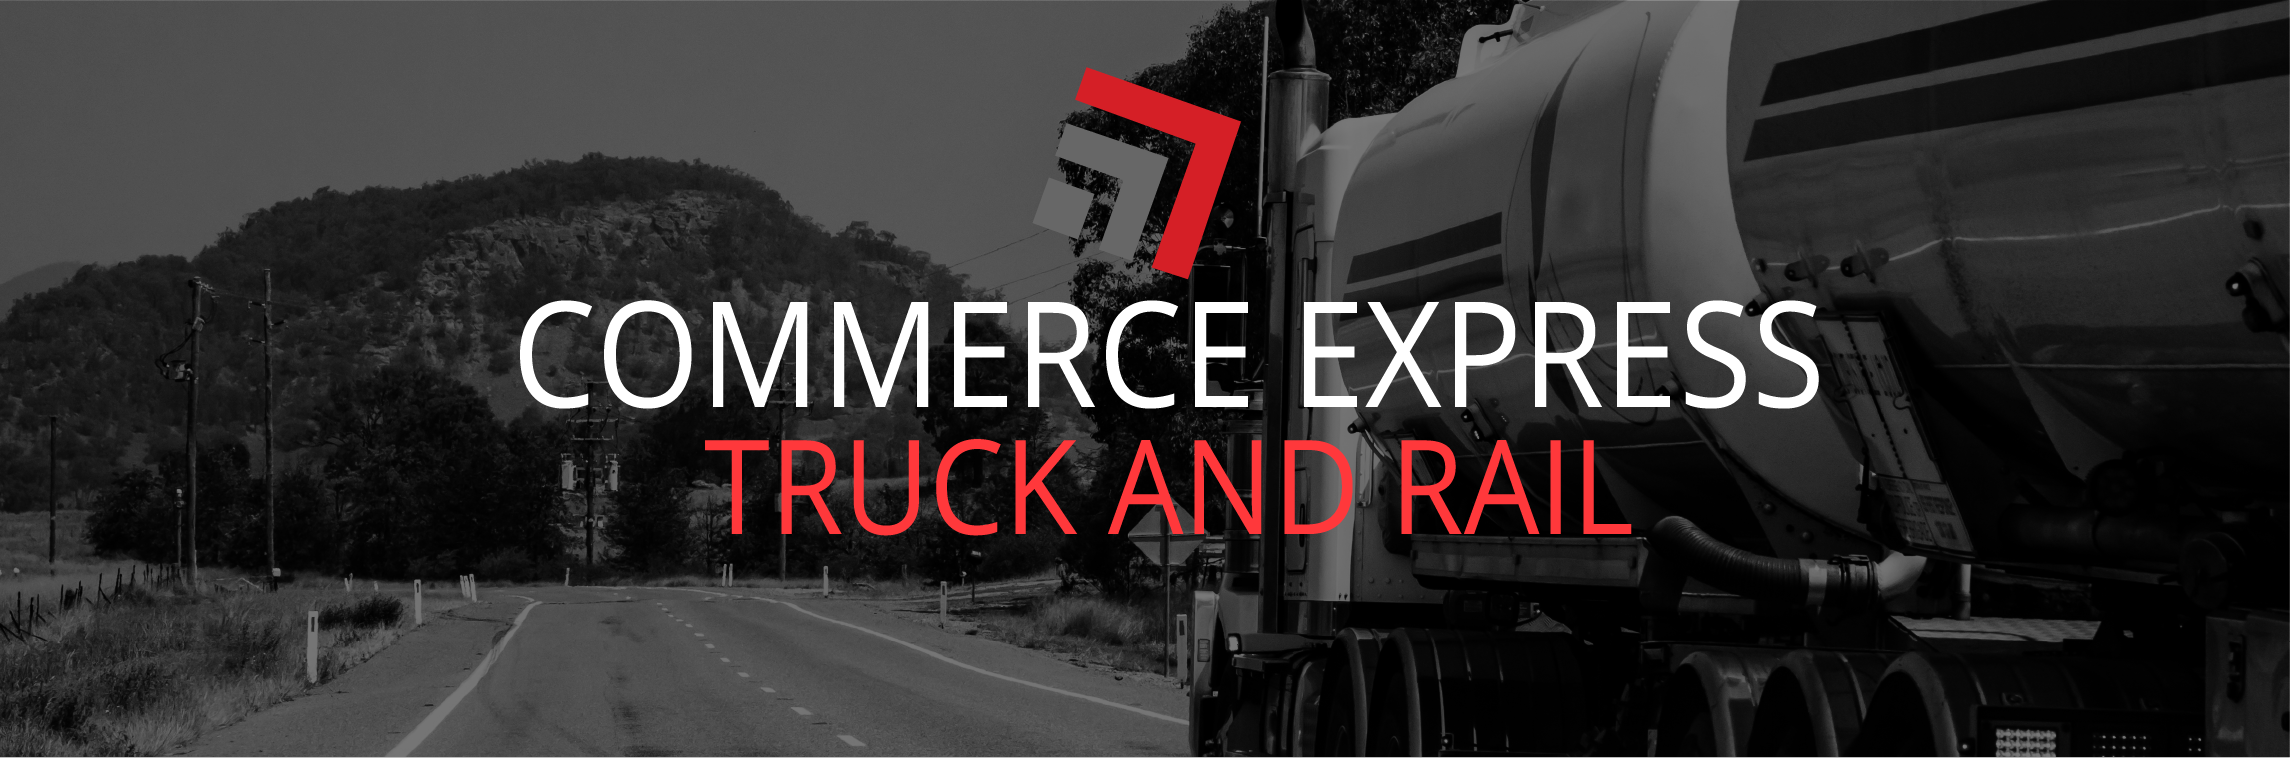 Commerce Express